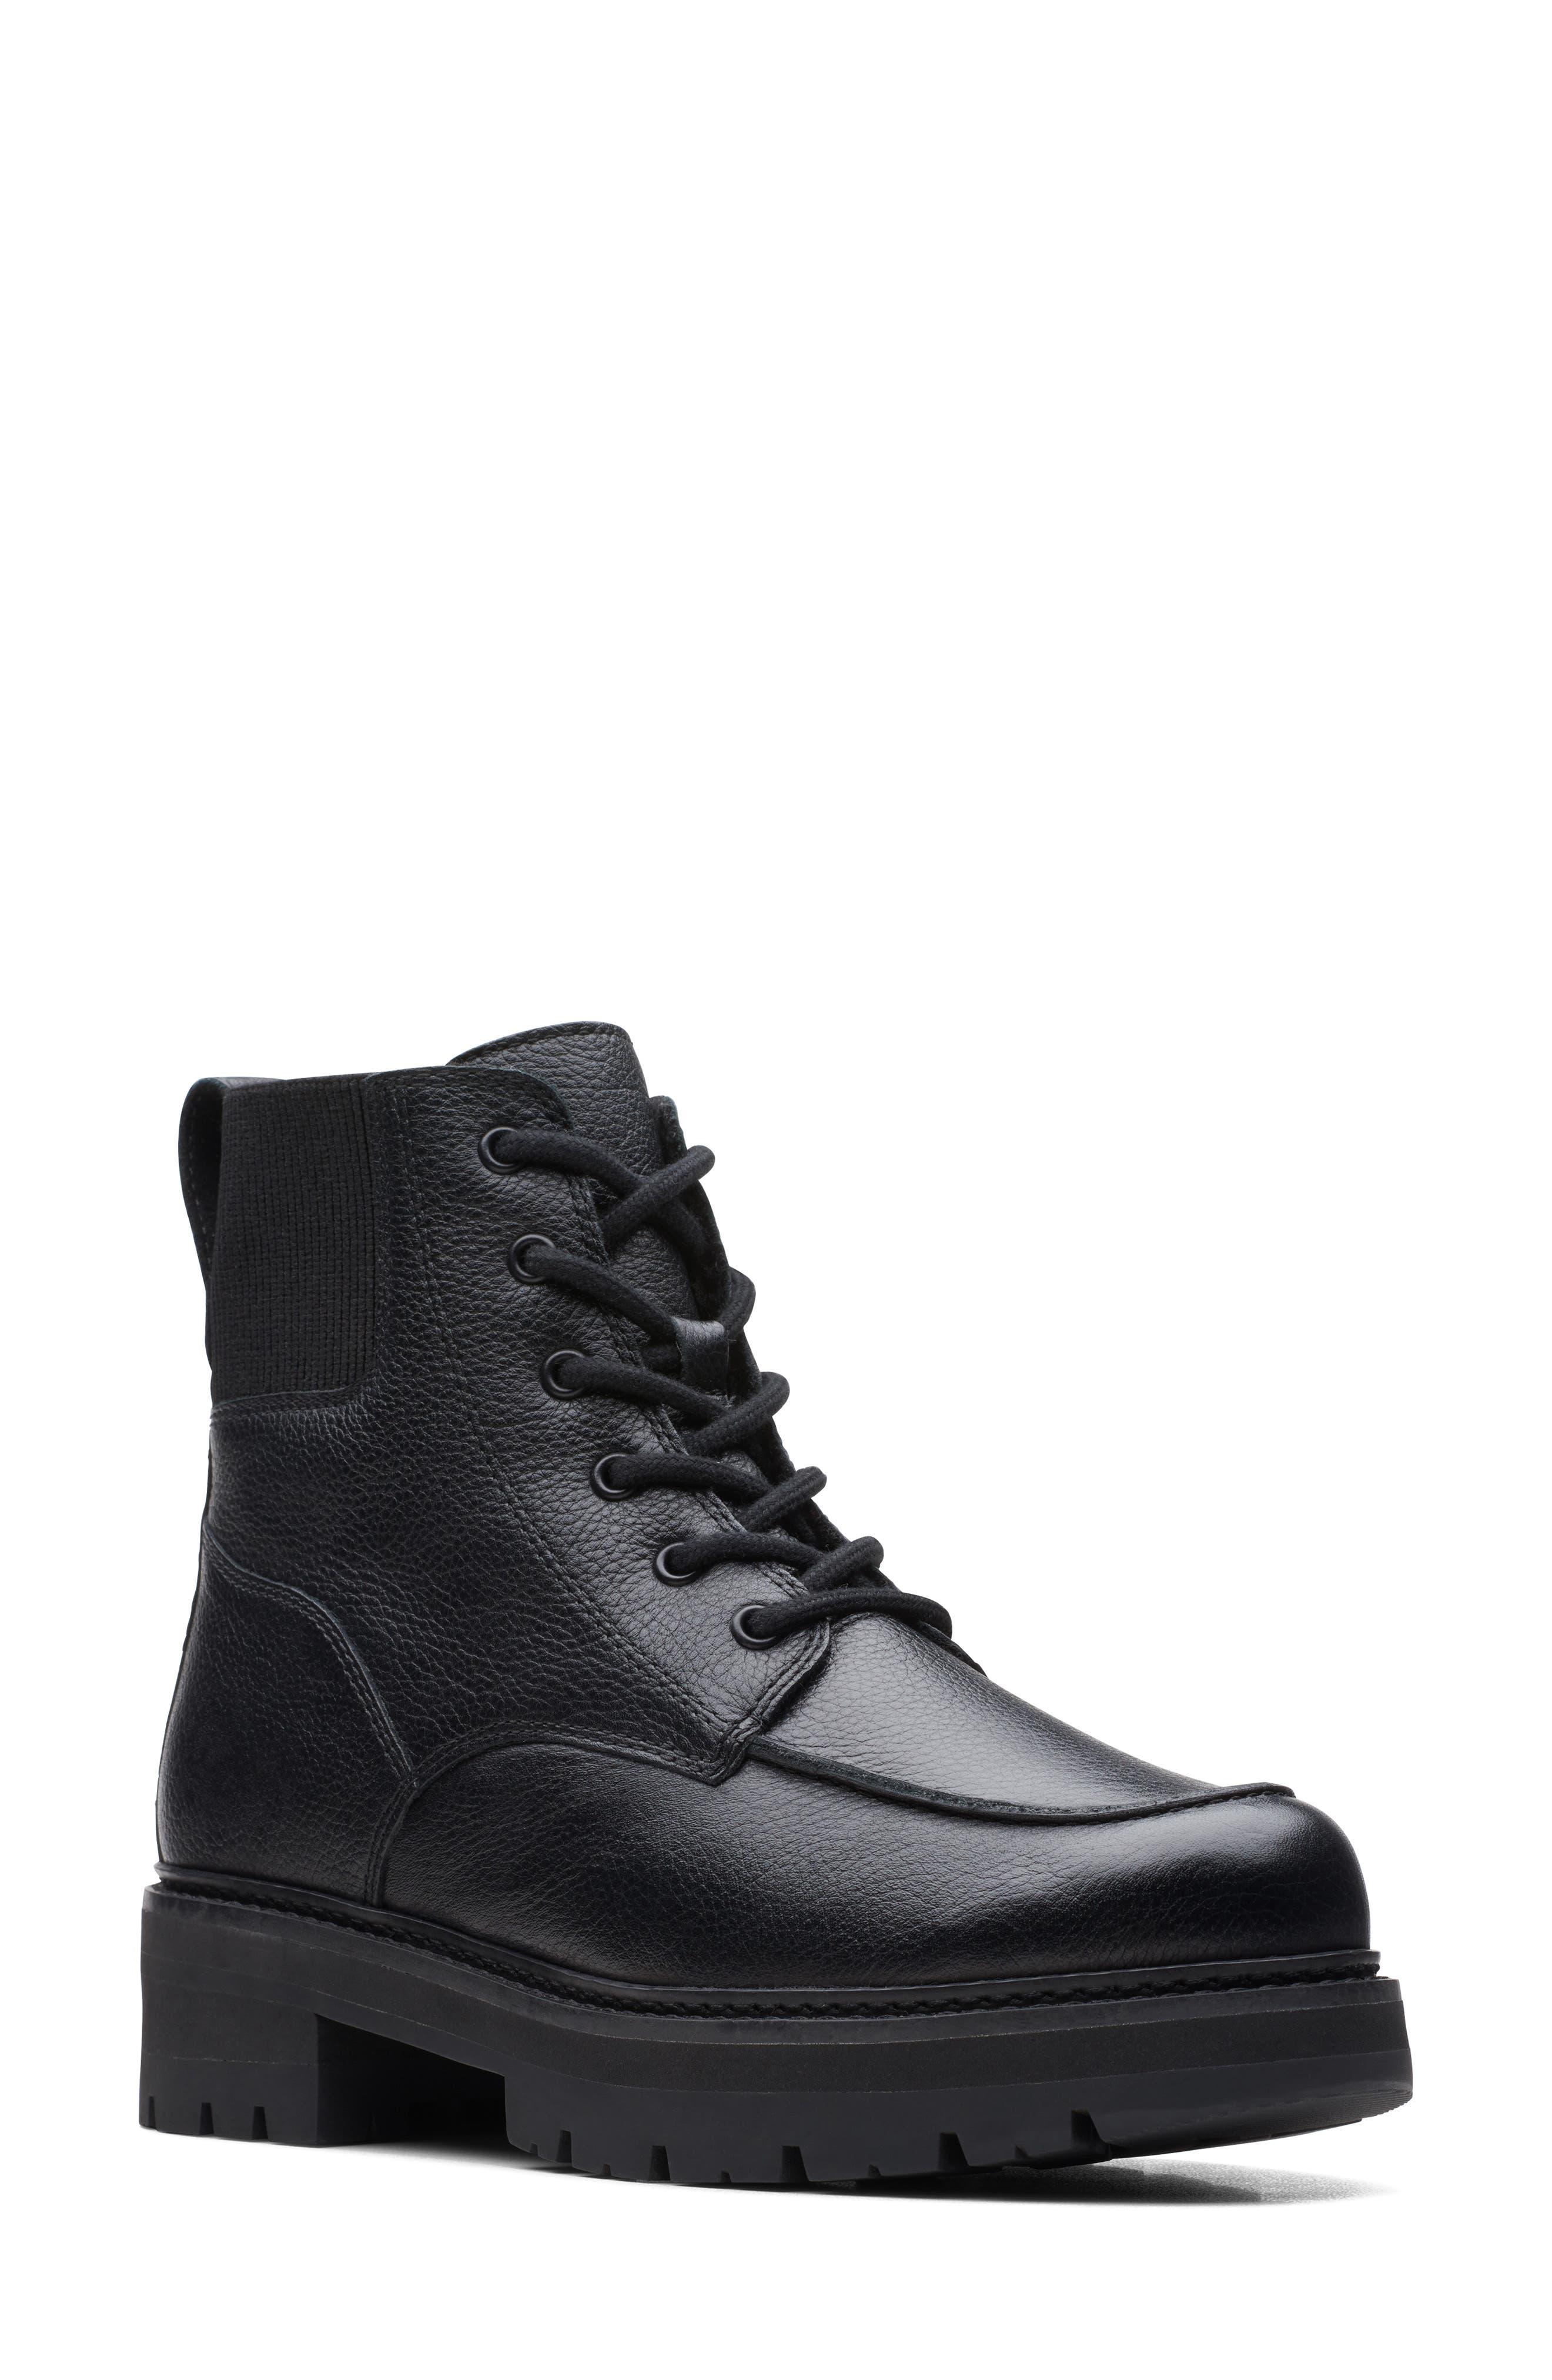 Clarks Clarks(r) Orianna Mid Lace-up Combat Boot in Black | Lyst